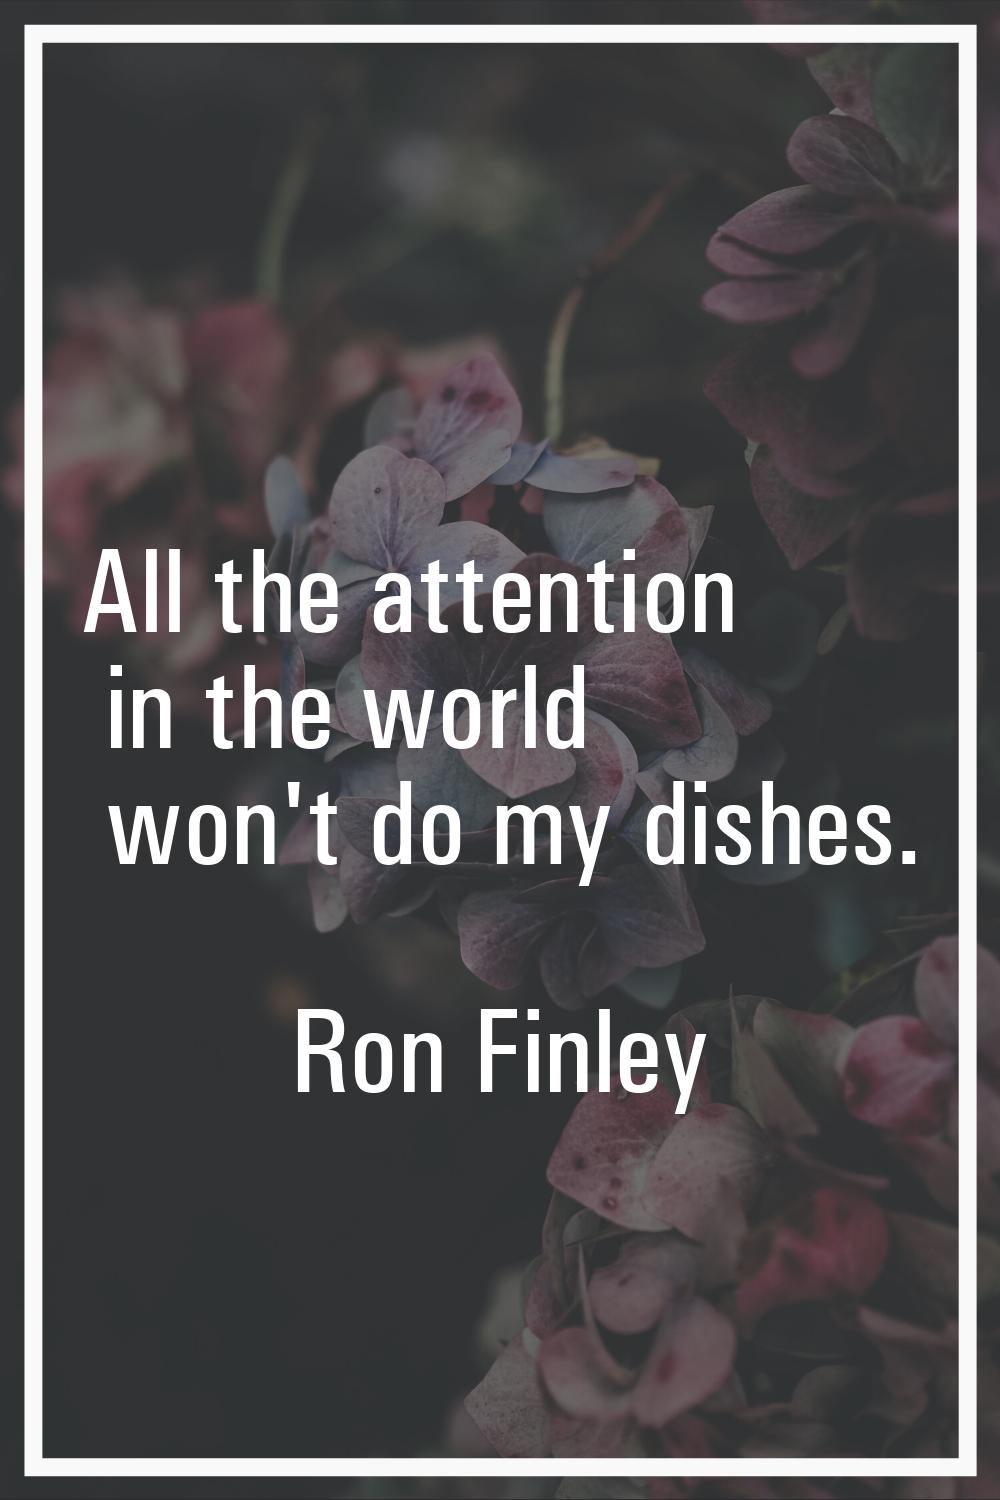 All the attention in the world won't do my dishes.